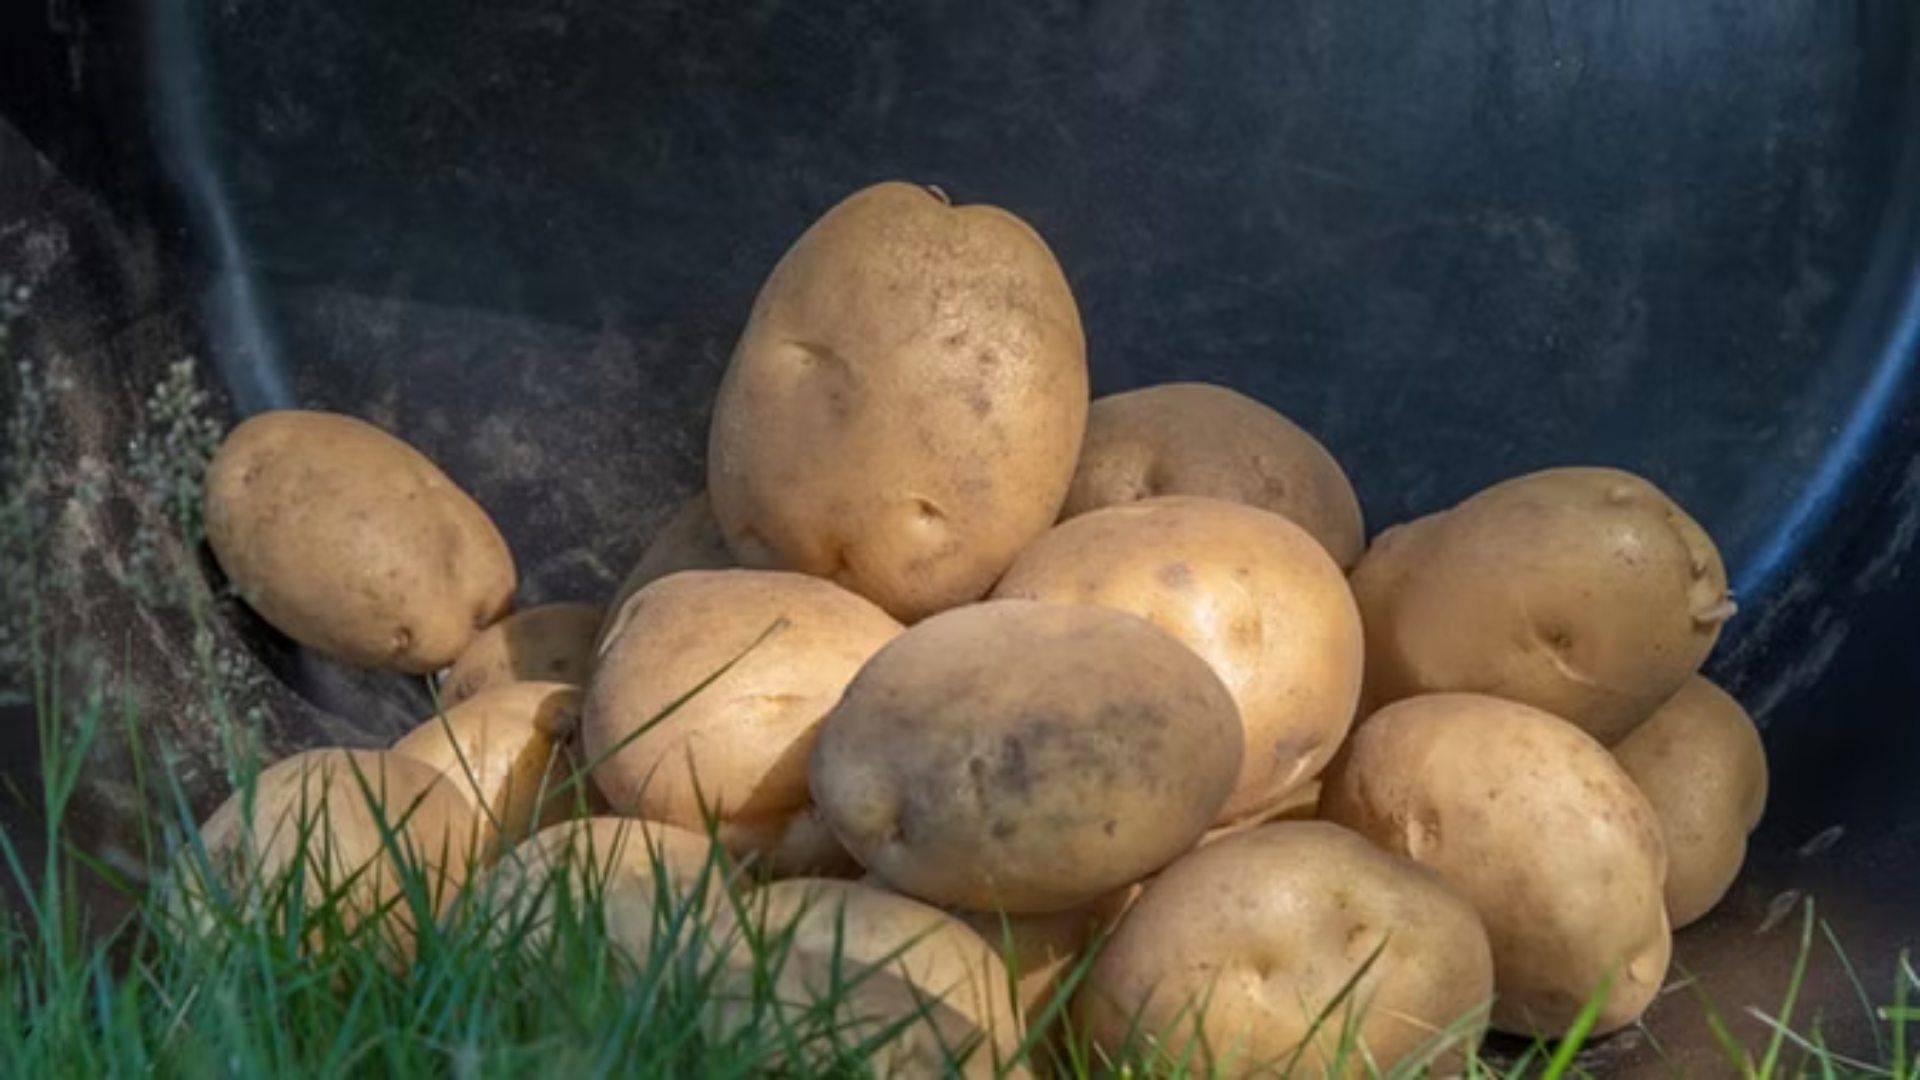 Most Expensive Potato: This is the world's costliest potato, know here's why